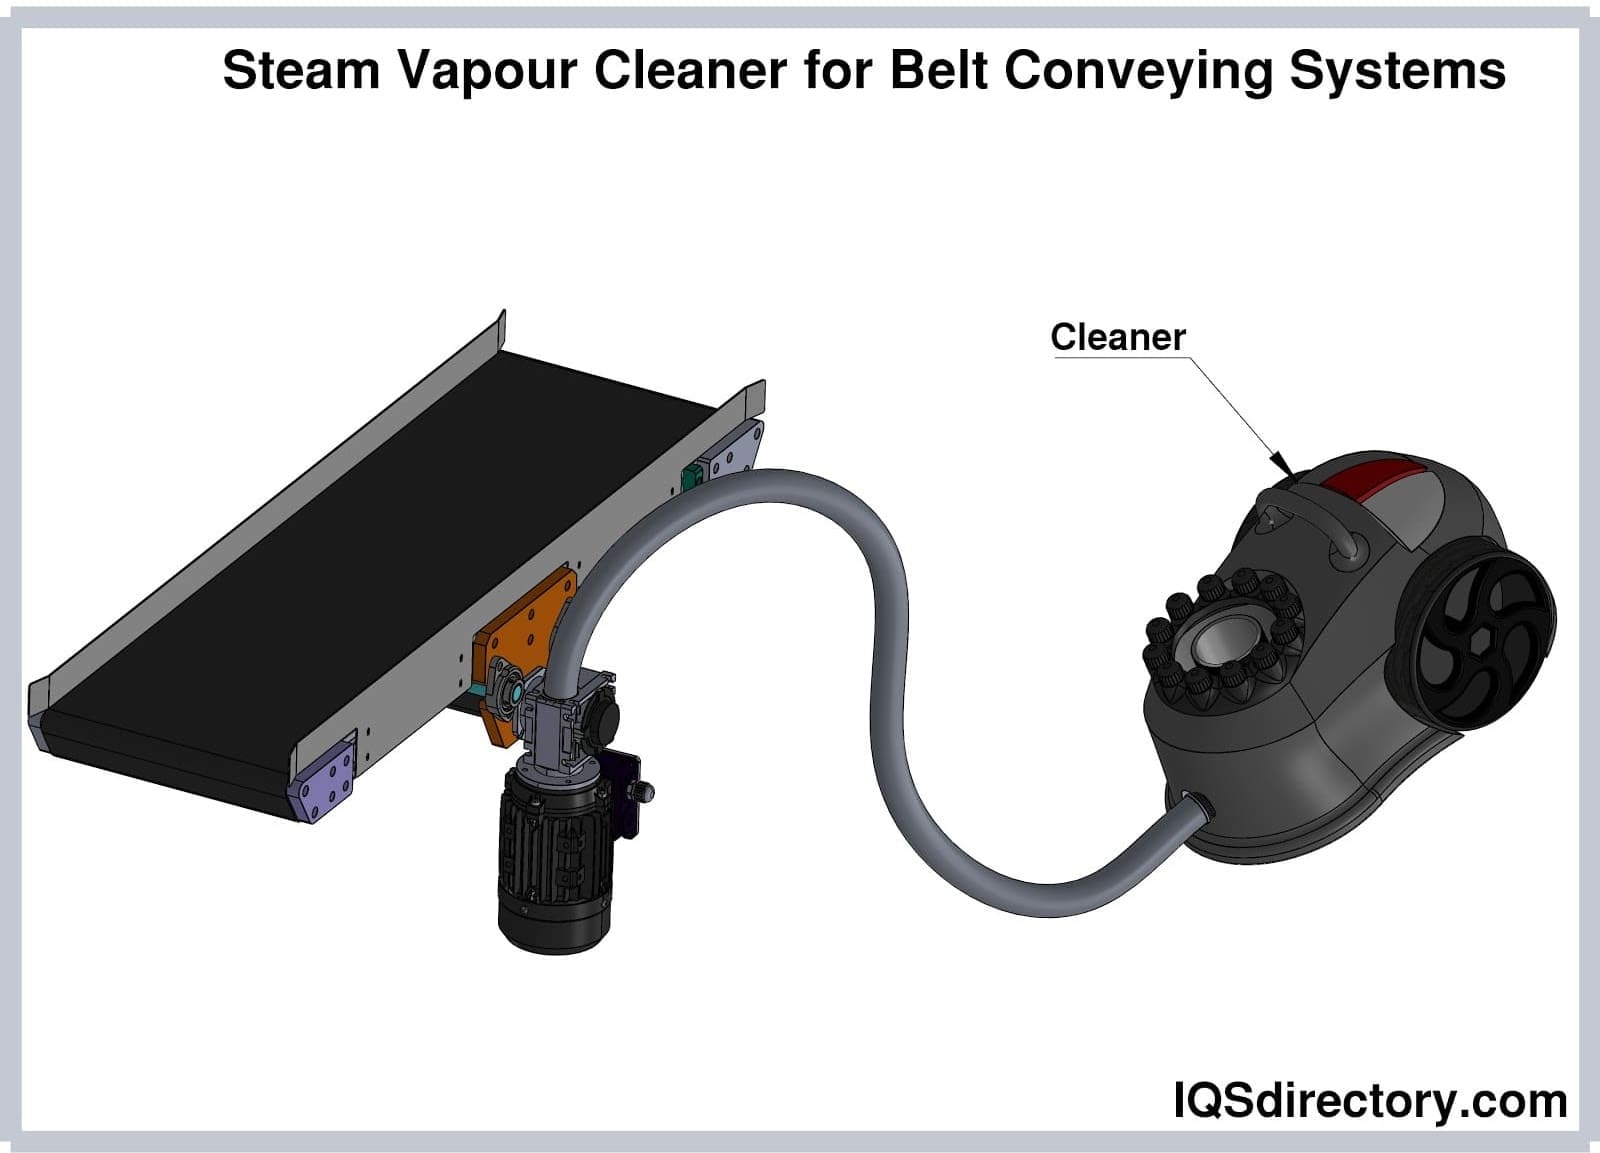 Steam Vapour Cleaner for Belt Conveying Systems